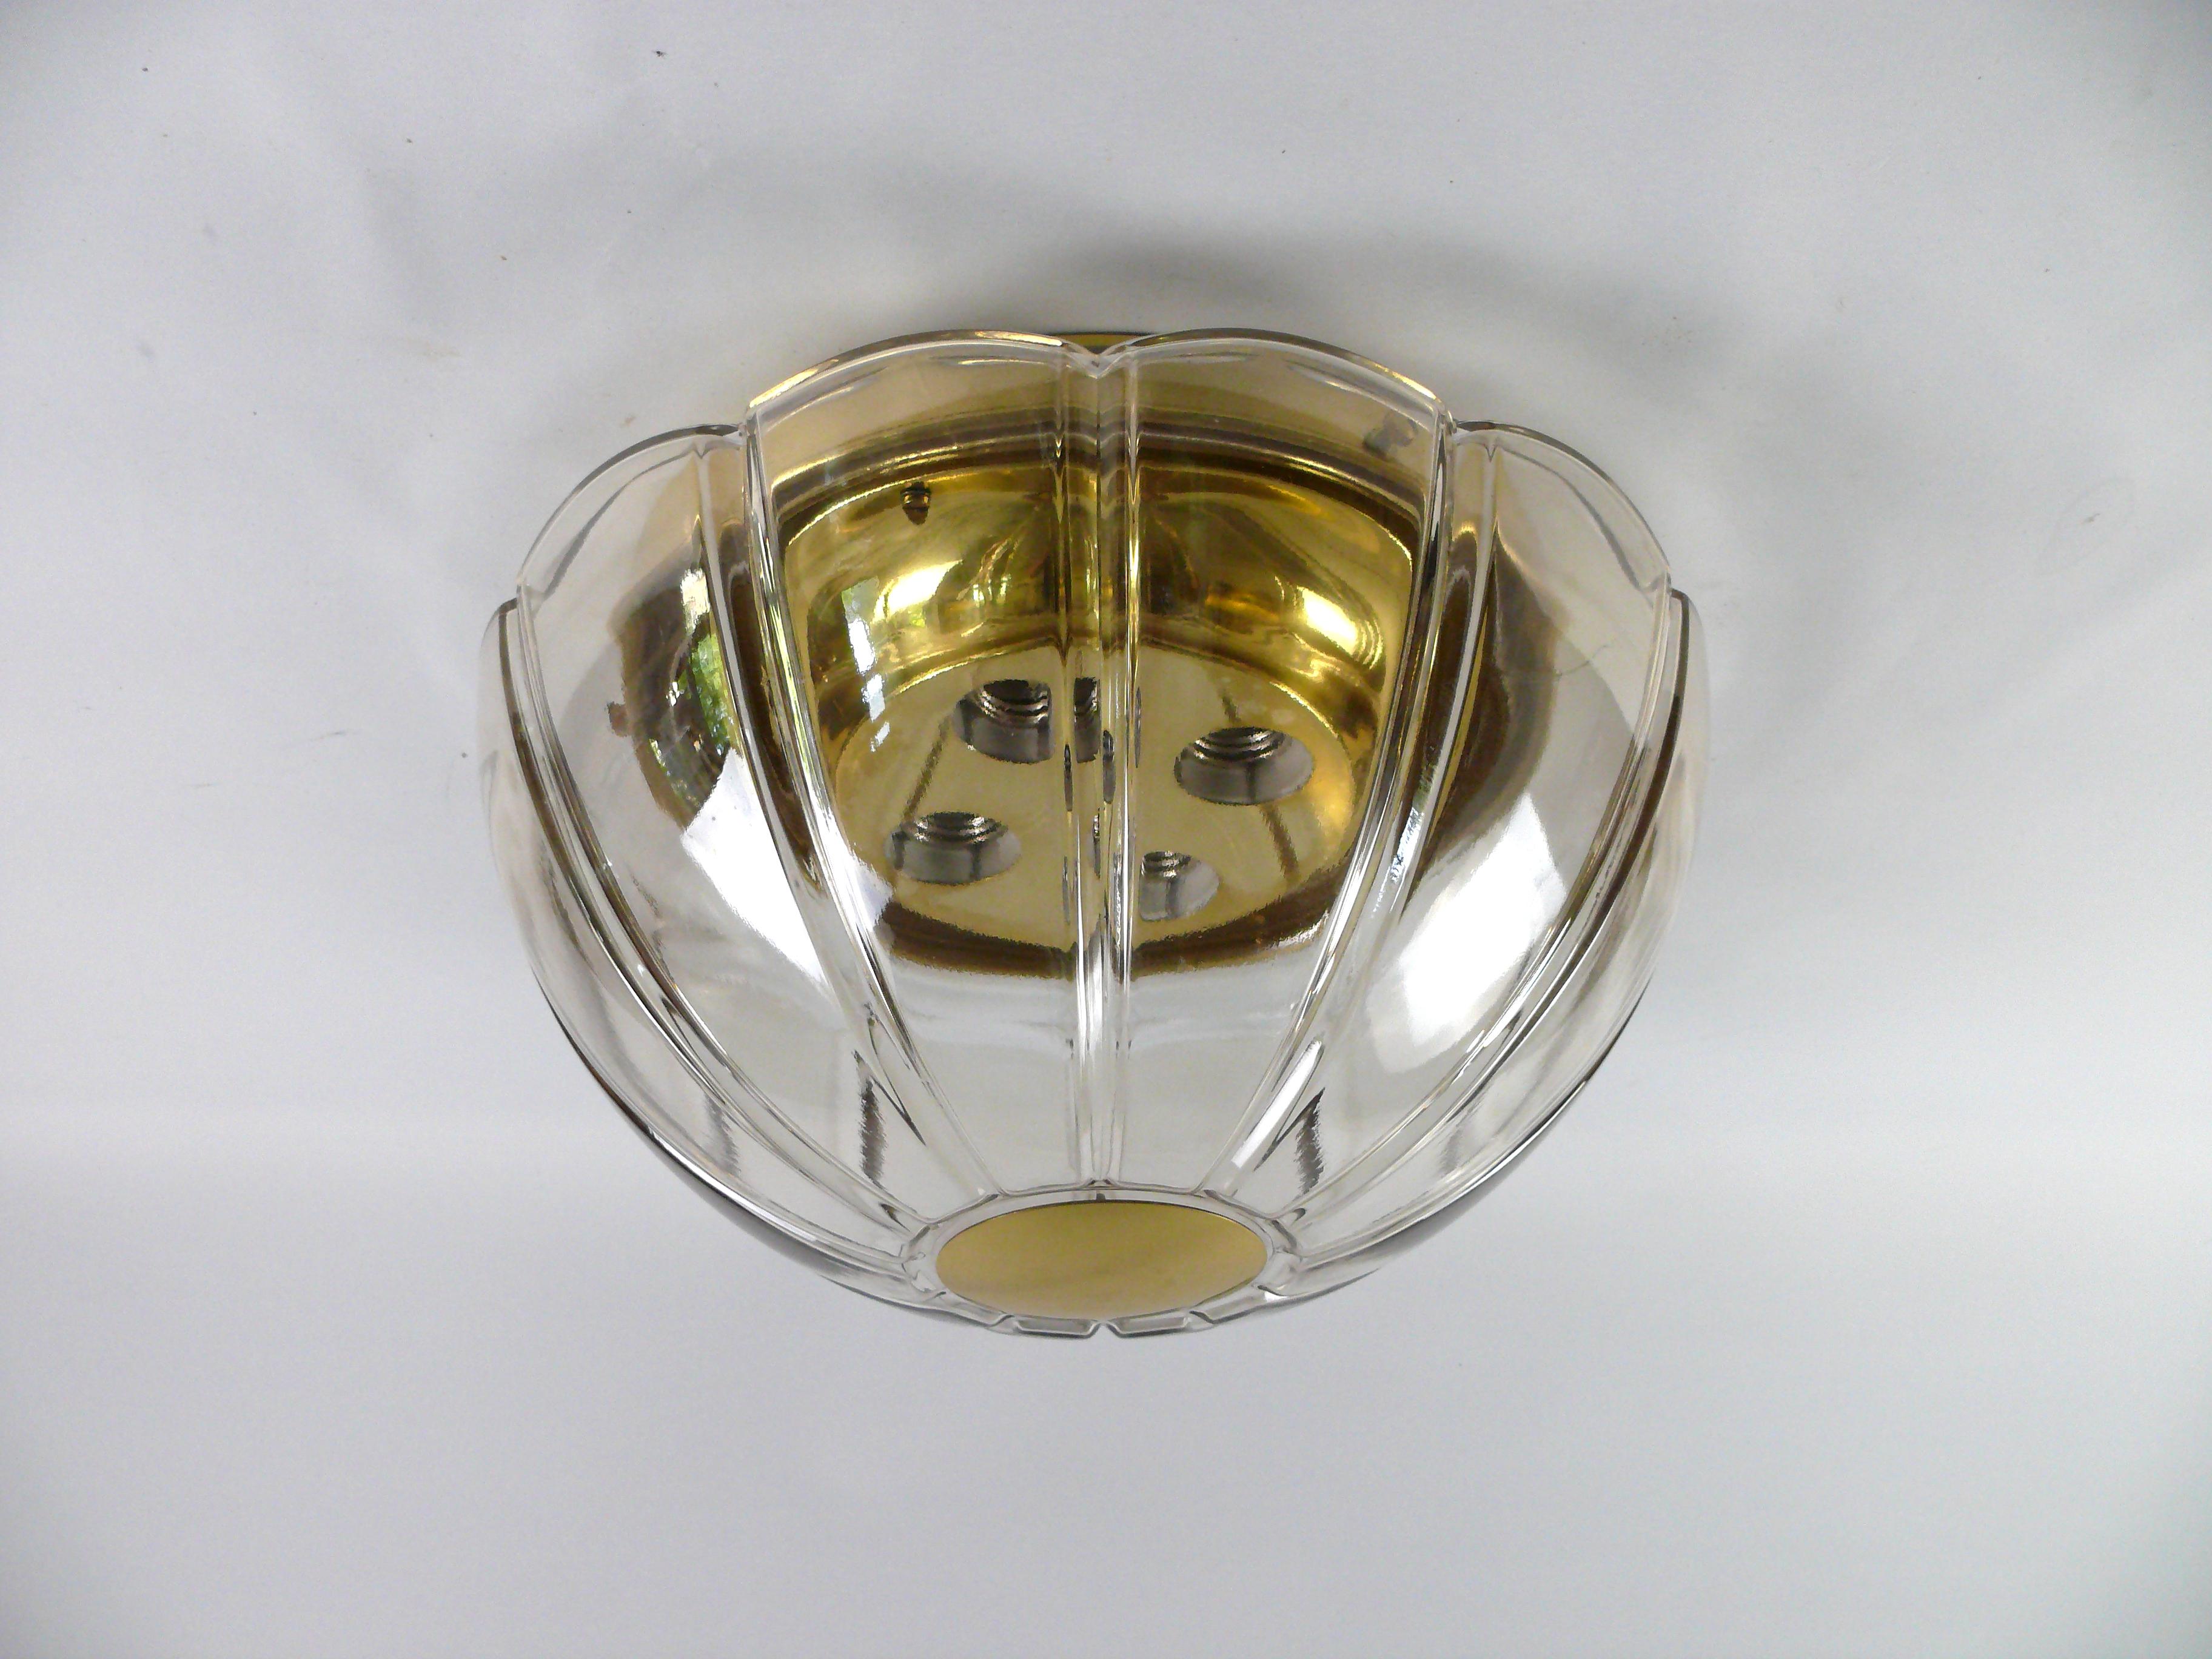 Original lamp from the 1960s from the company Glashütte Limburg, Germany - model 3142 - see picture. The lamp is made of brass and light smoked glass. It can be attached to both the ceiling and the wall. The lamp has four E 27 ceramic sockets and